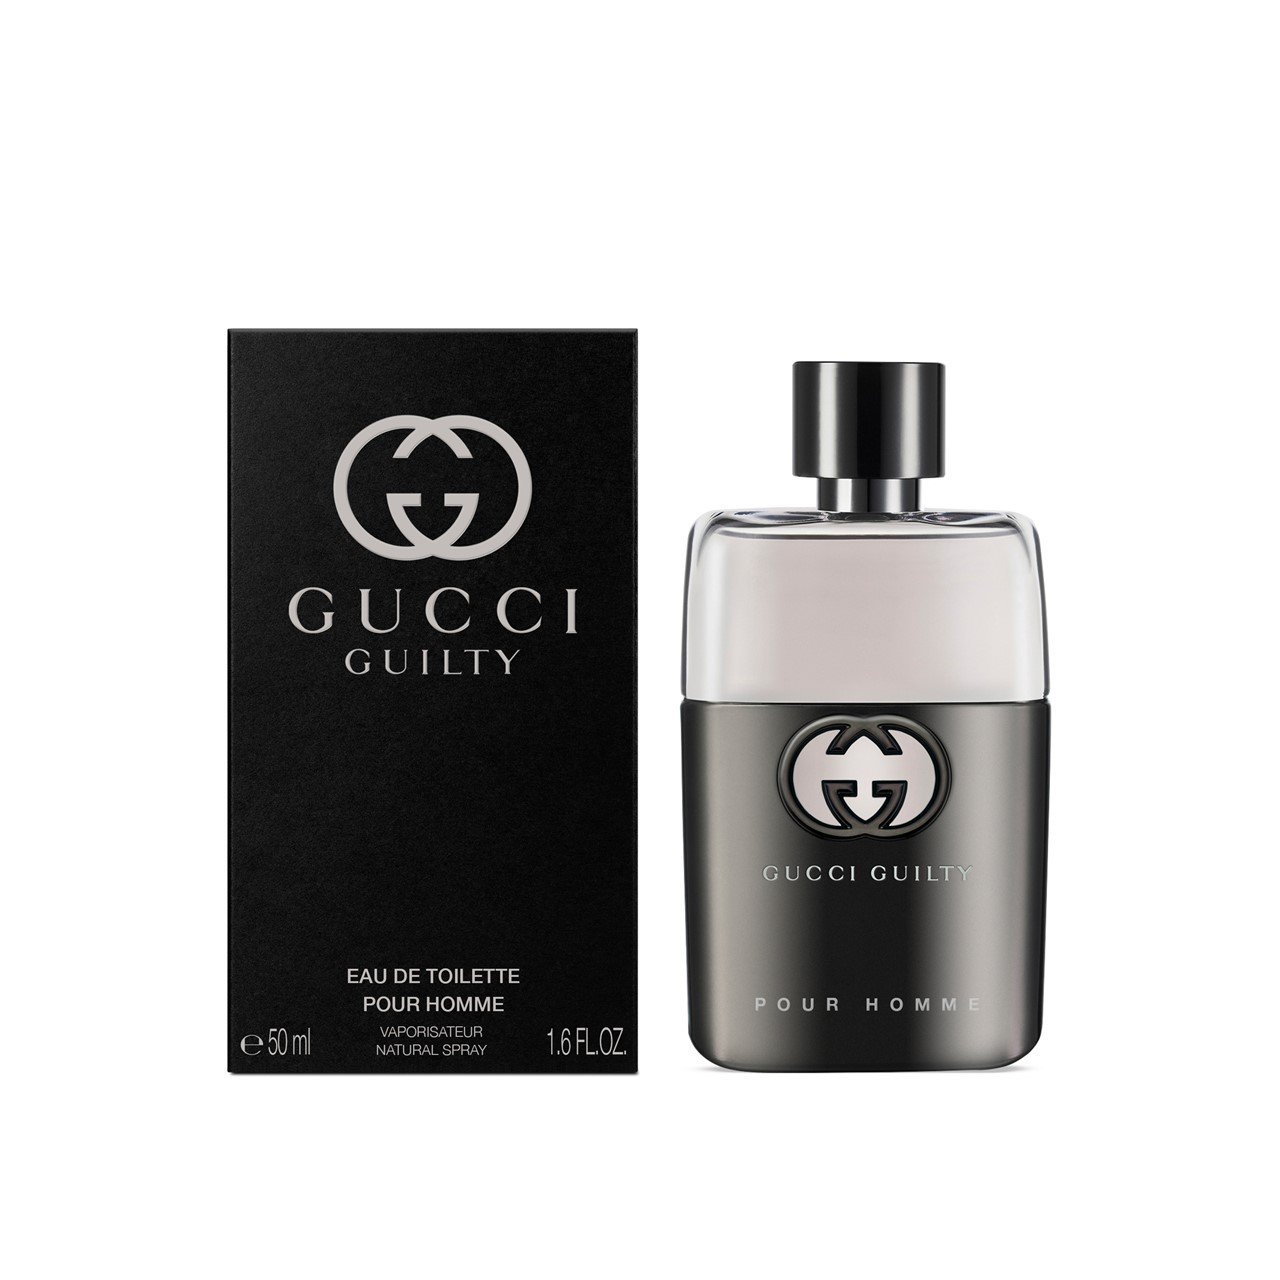 GUCCI – GUILTY PH EDT 50mL